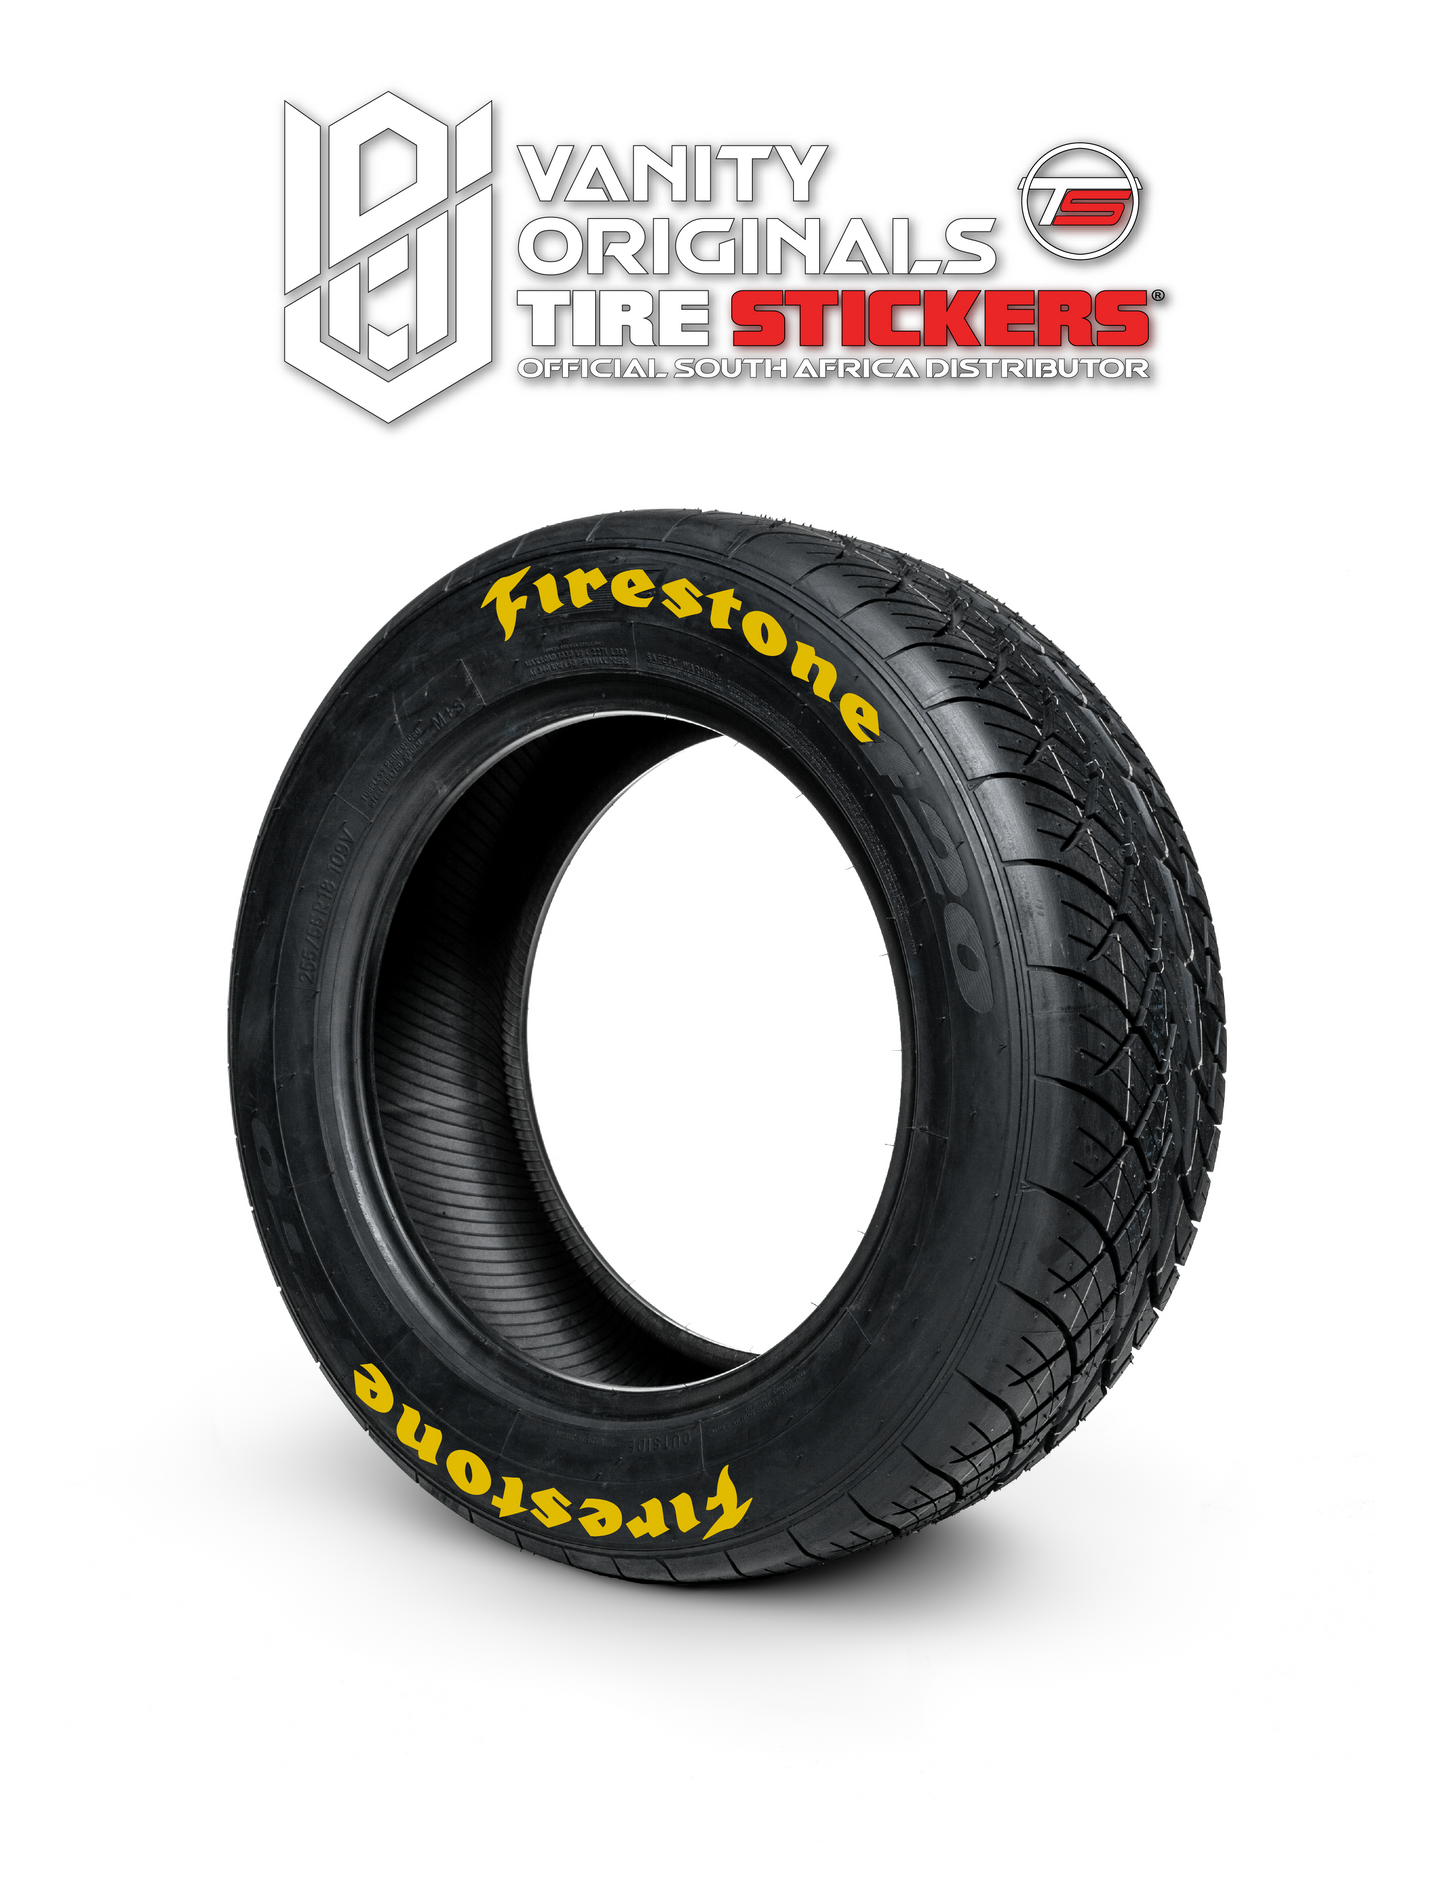 Firestone ( 8x Rubber Decals, Adhesive & Instructions Included )